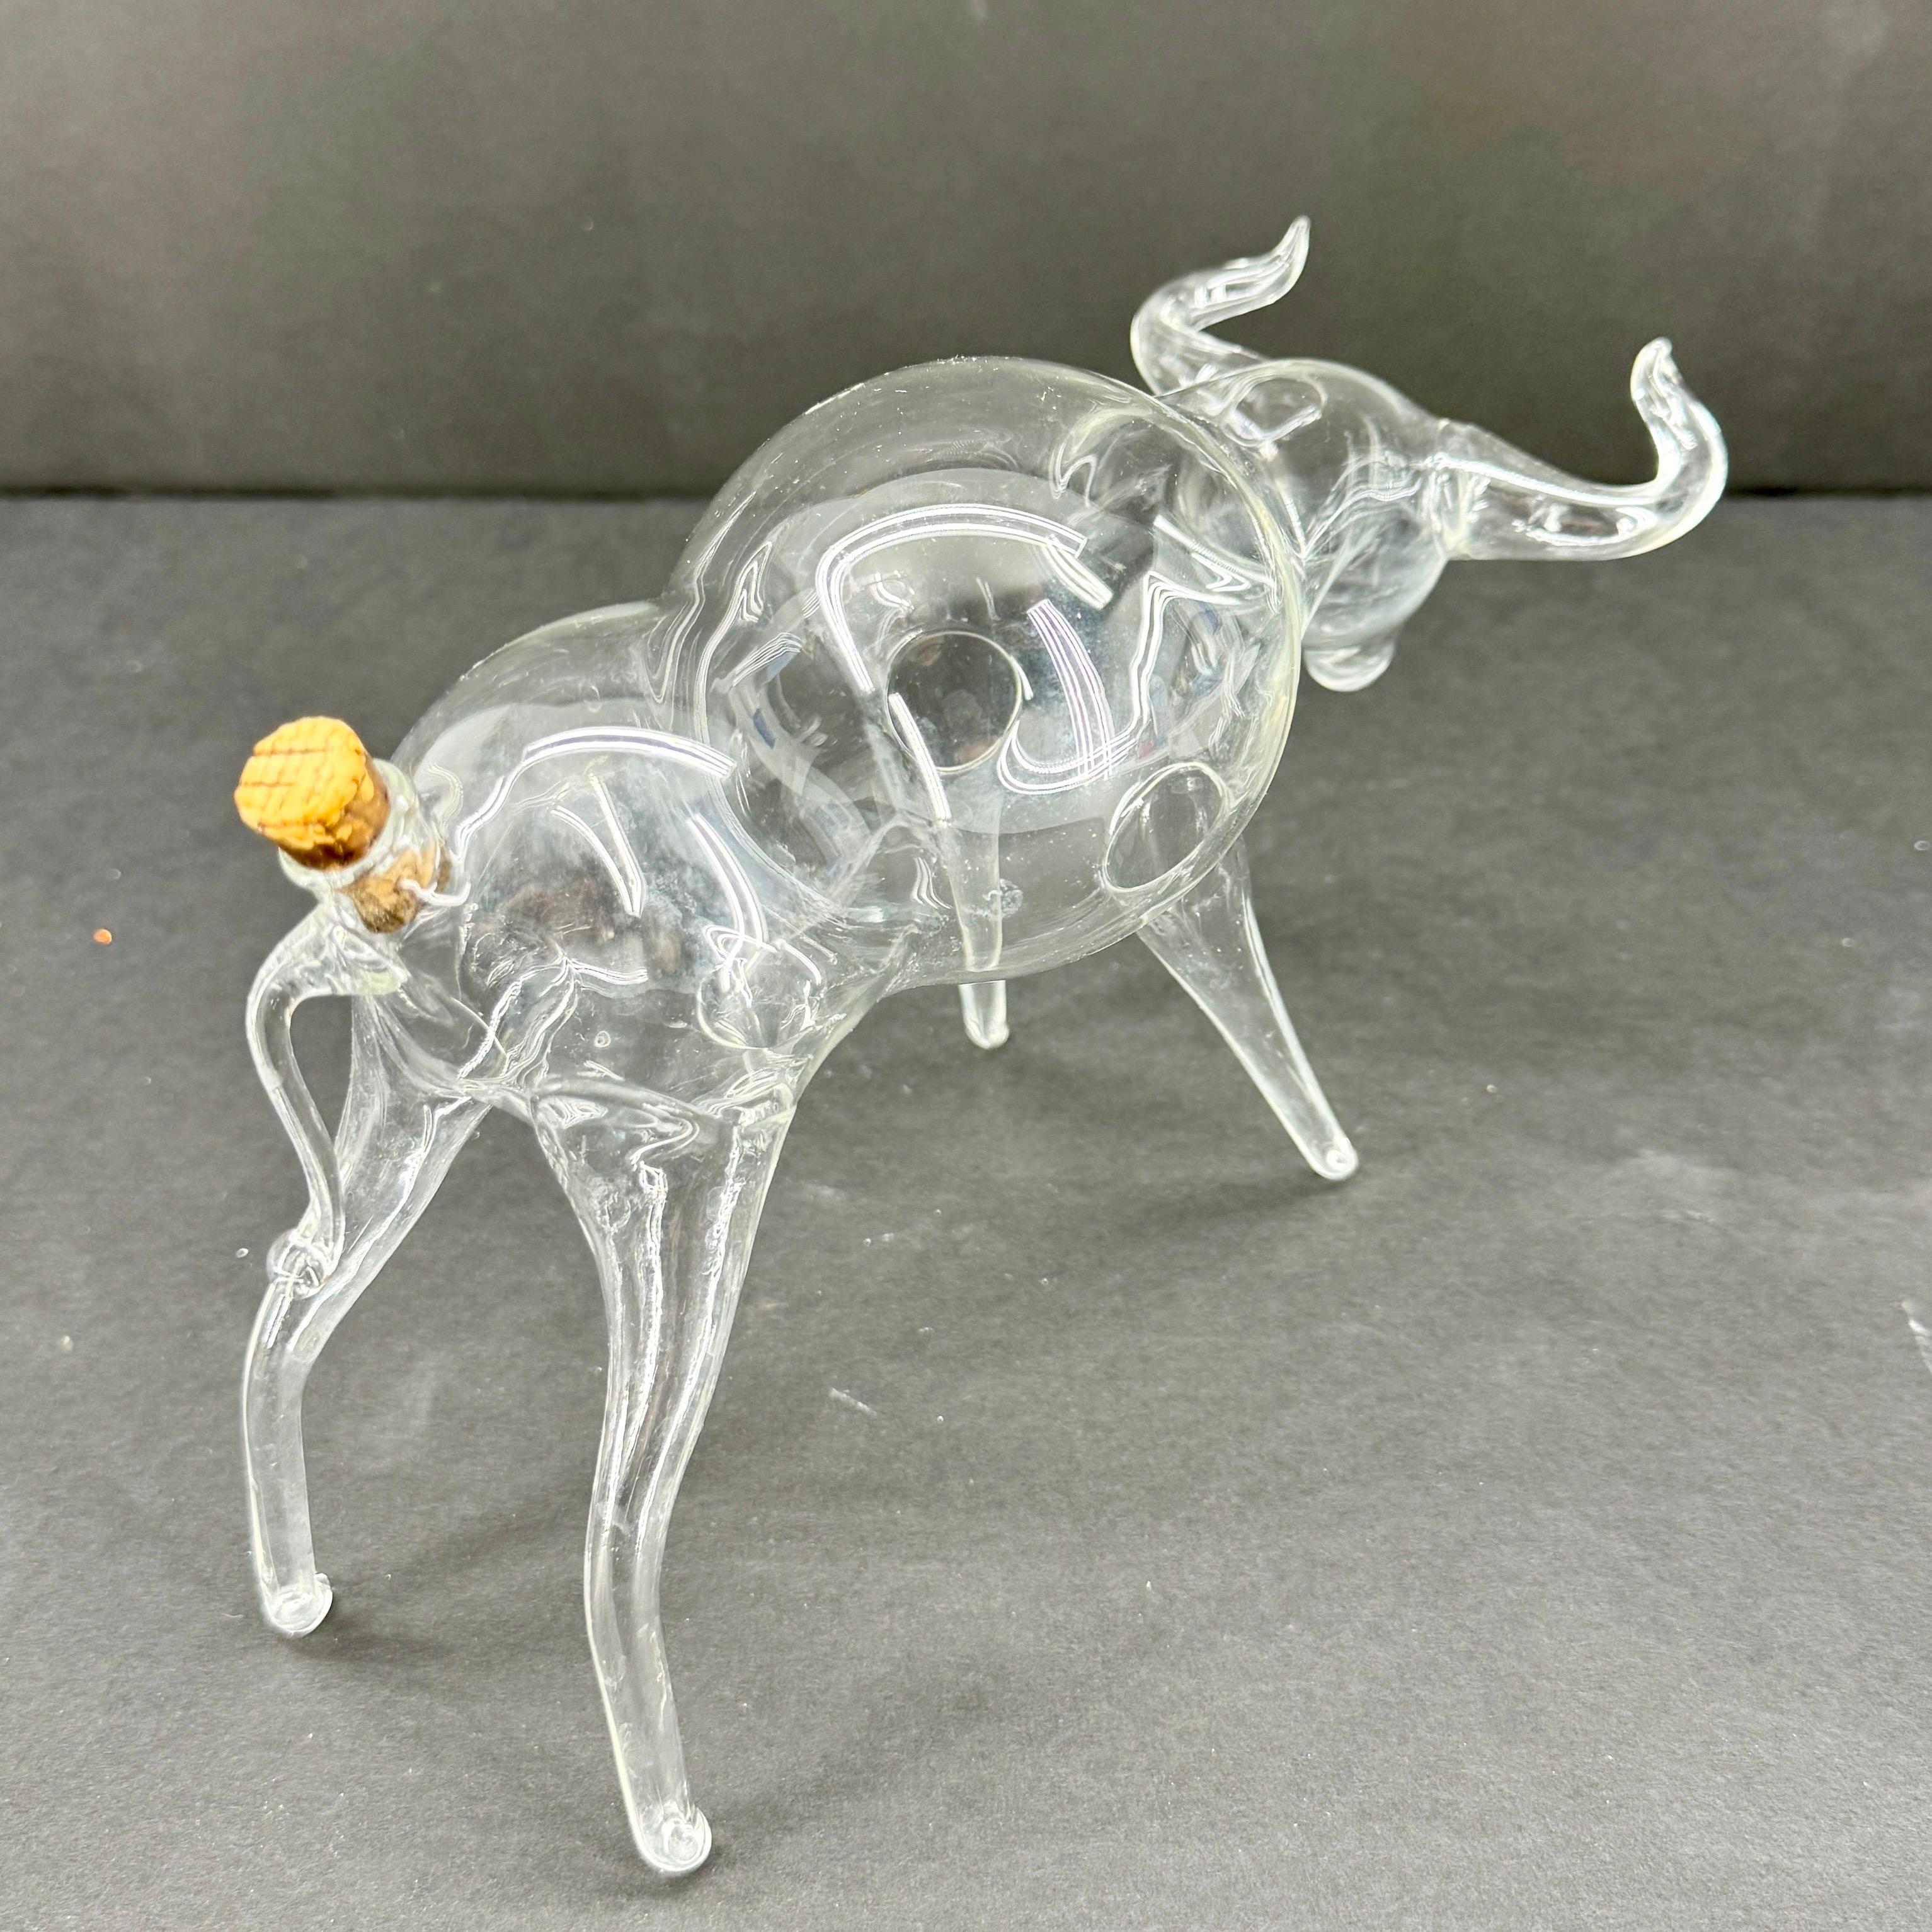 German Art Glass Bull Whiskey Decanter Sculpture  In Good Condition For Sale In Haddonfield, NJ